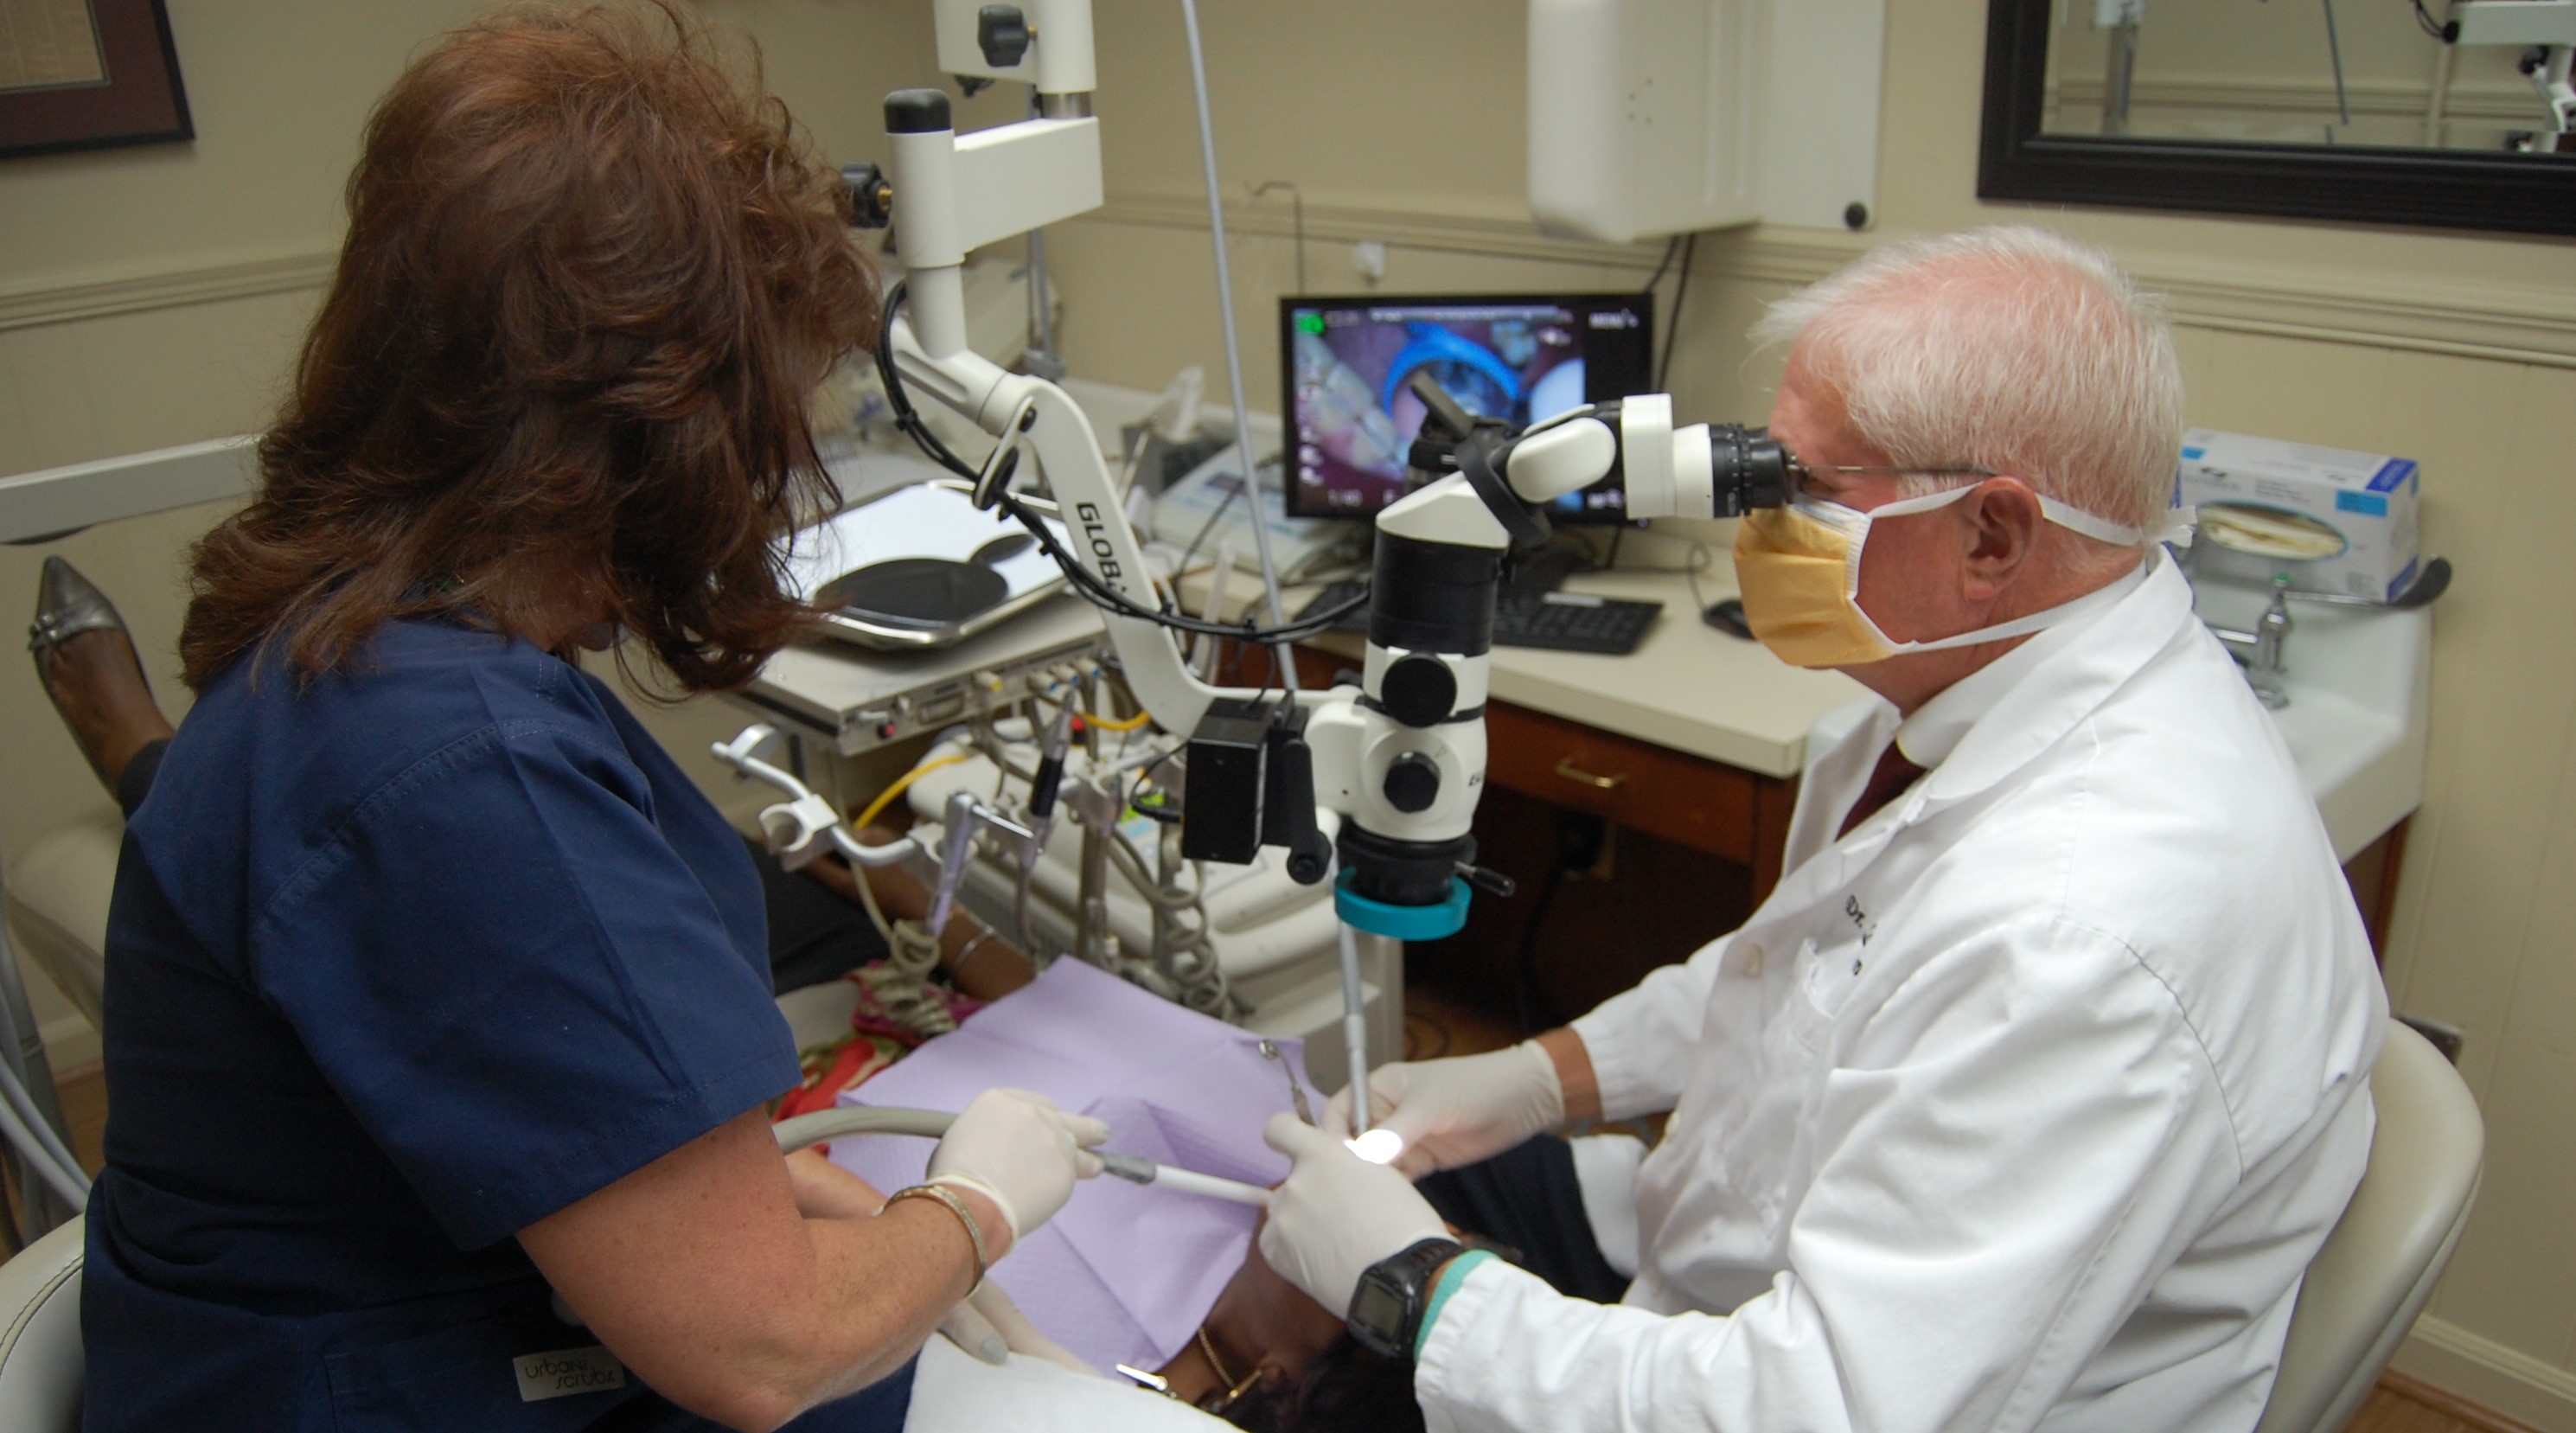 Dentist at microscope conducting research with assistant to his left